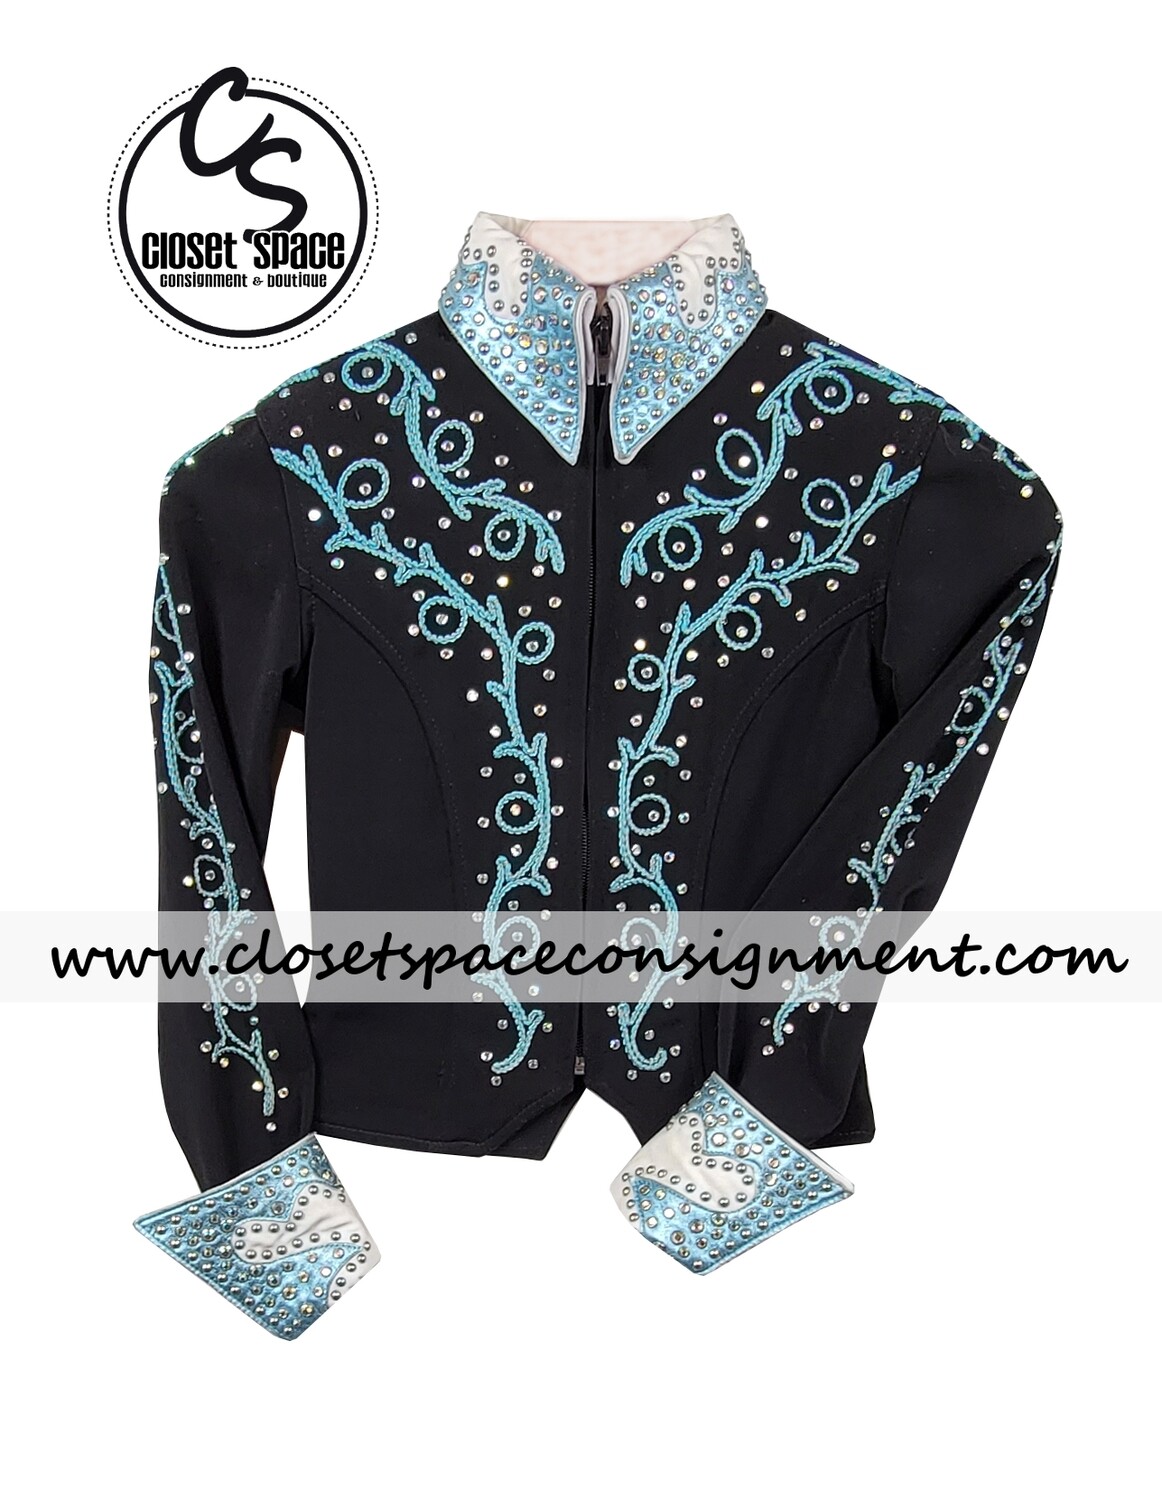 ​'Connie's' Black, Teal & White Jacket